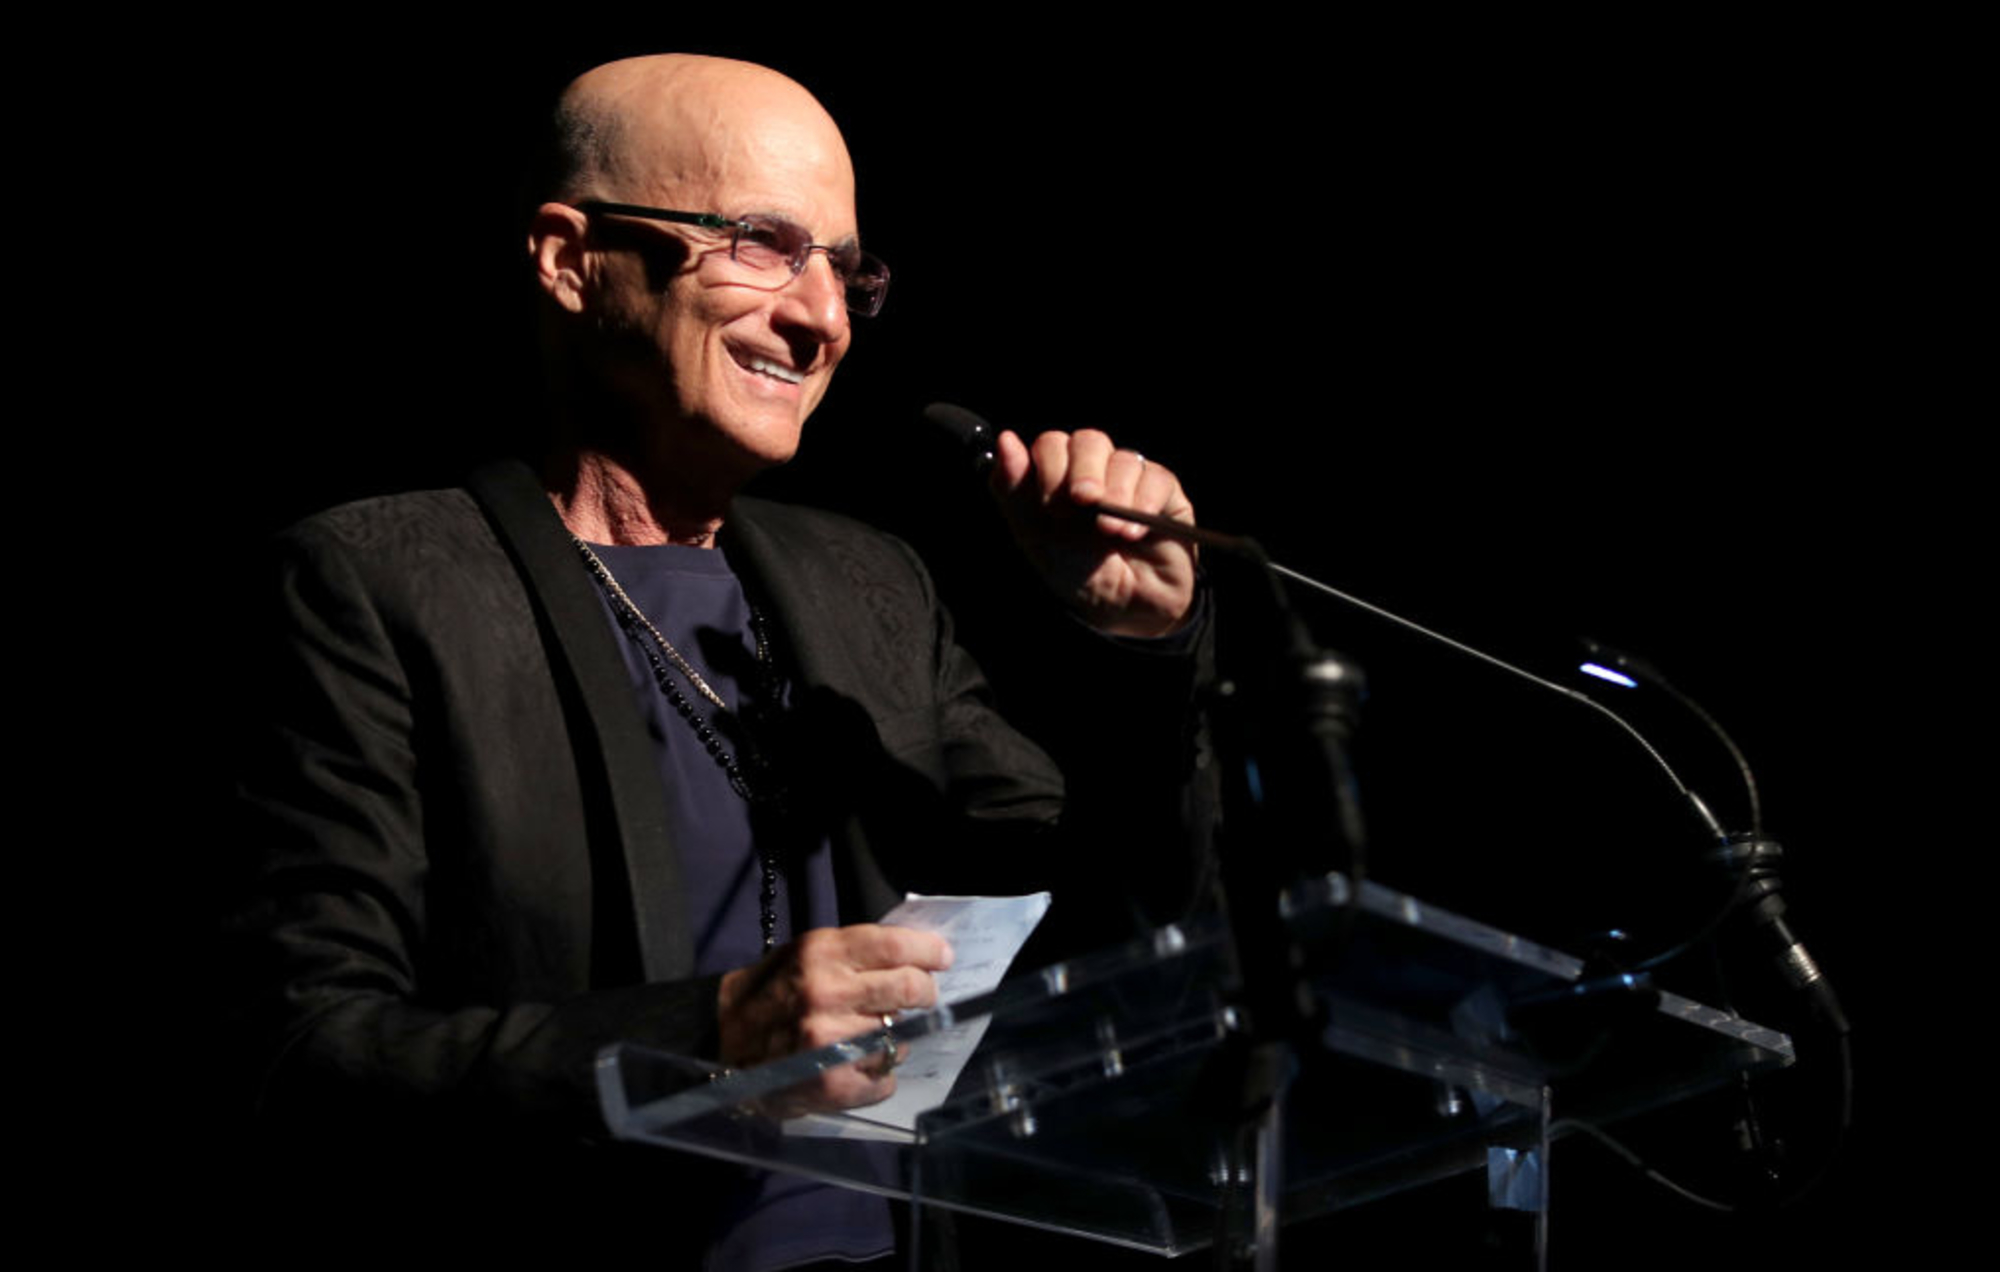 Jimmy Iovine sells worldwide producer royalties to Hipgnosis Song Fund